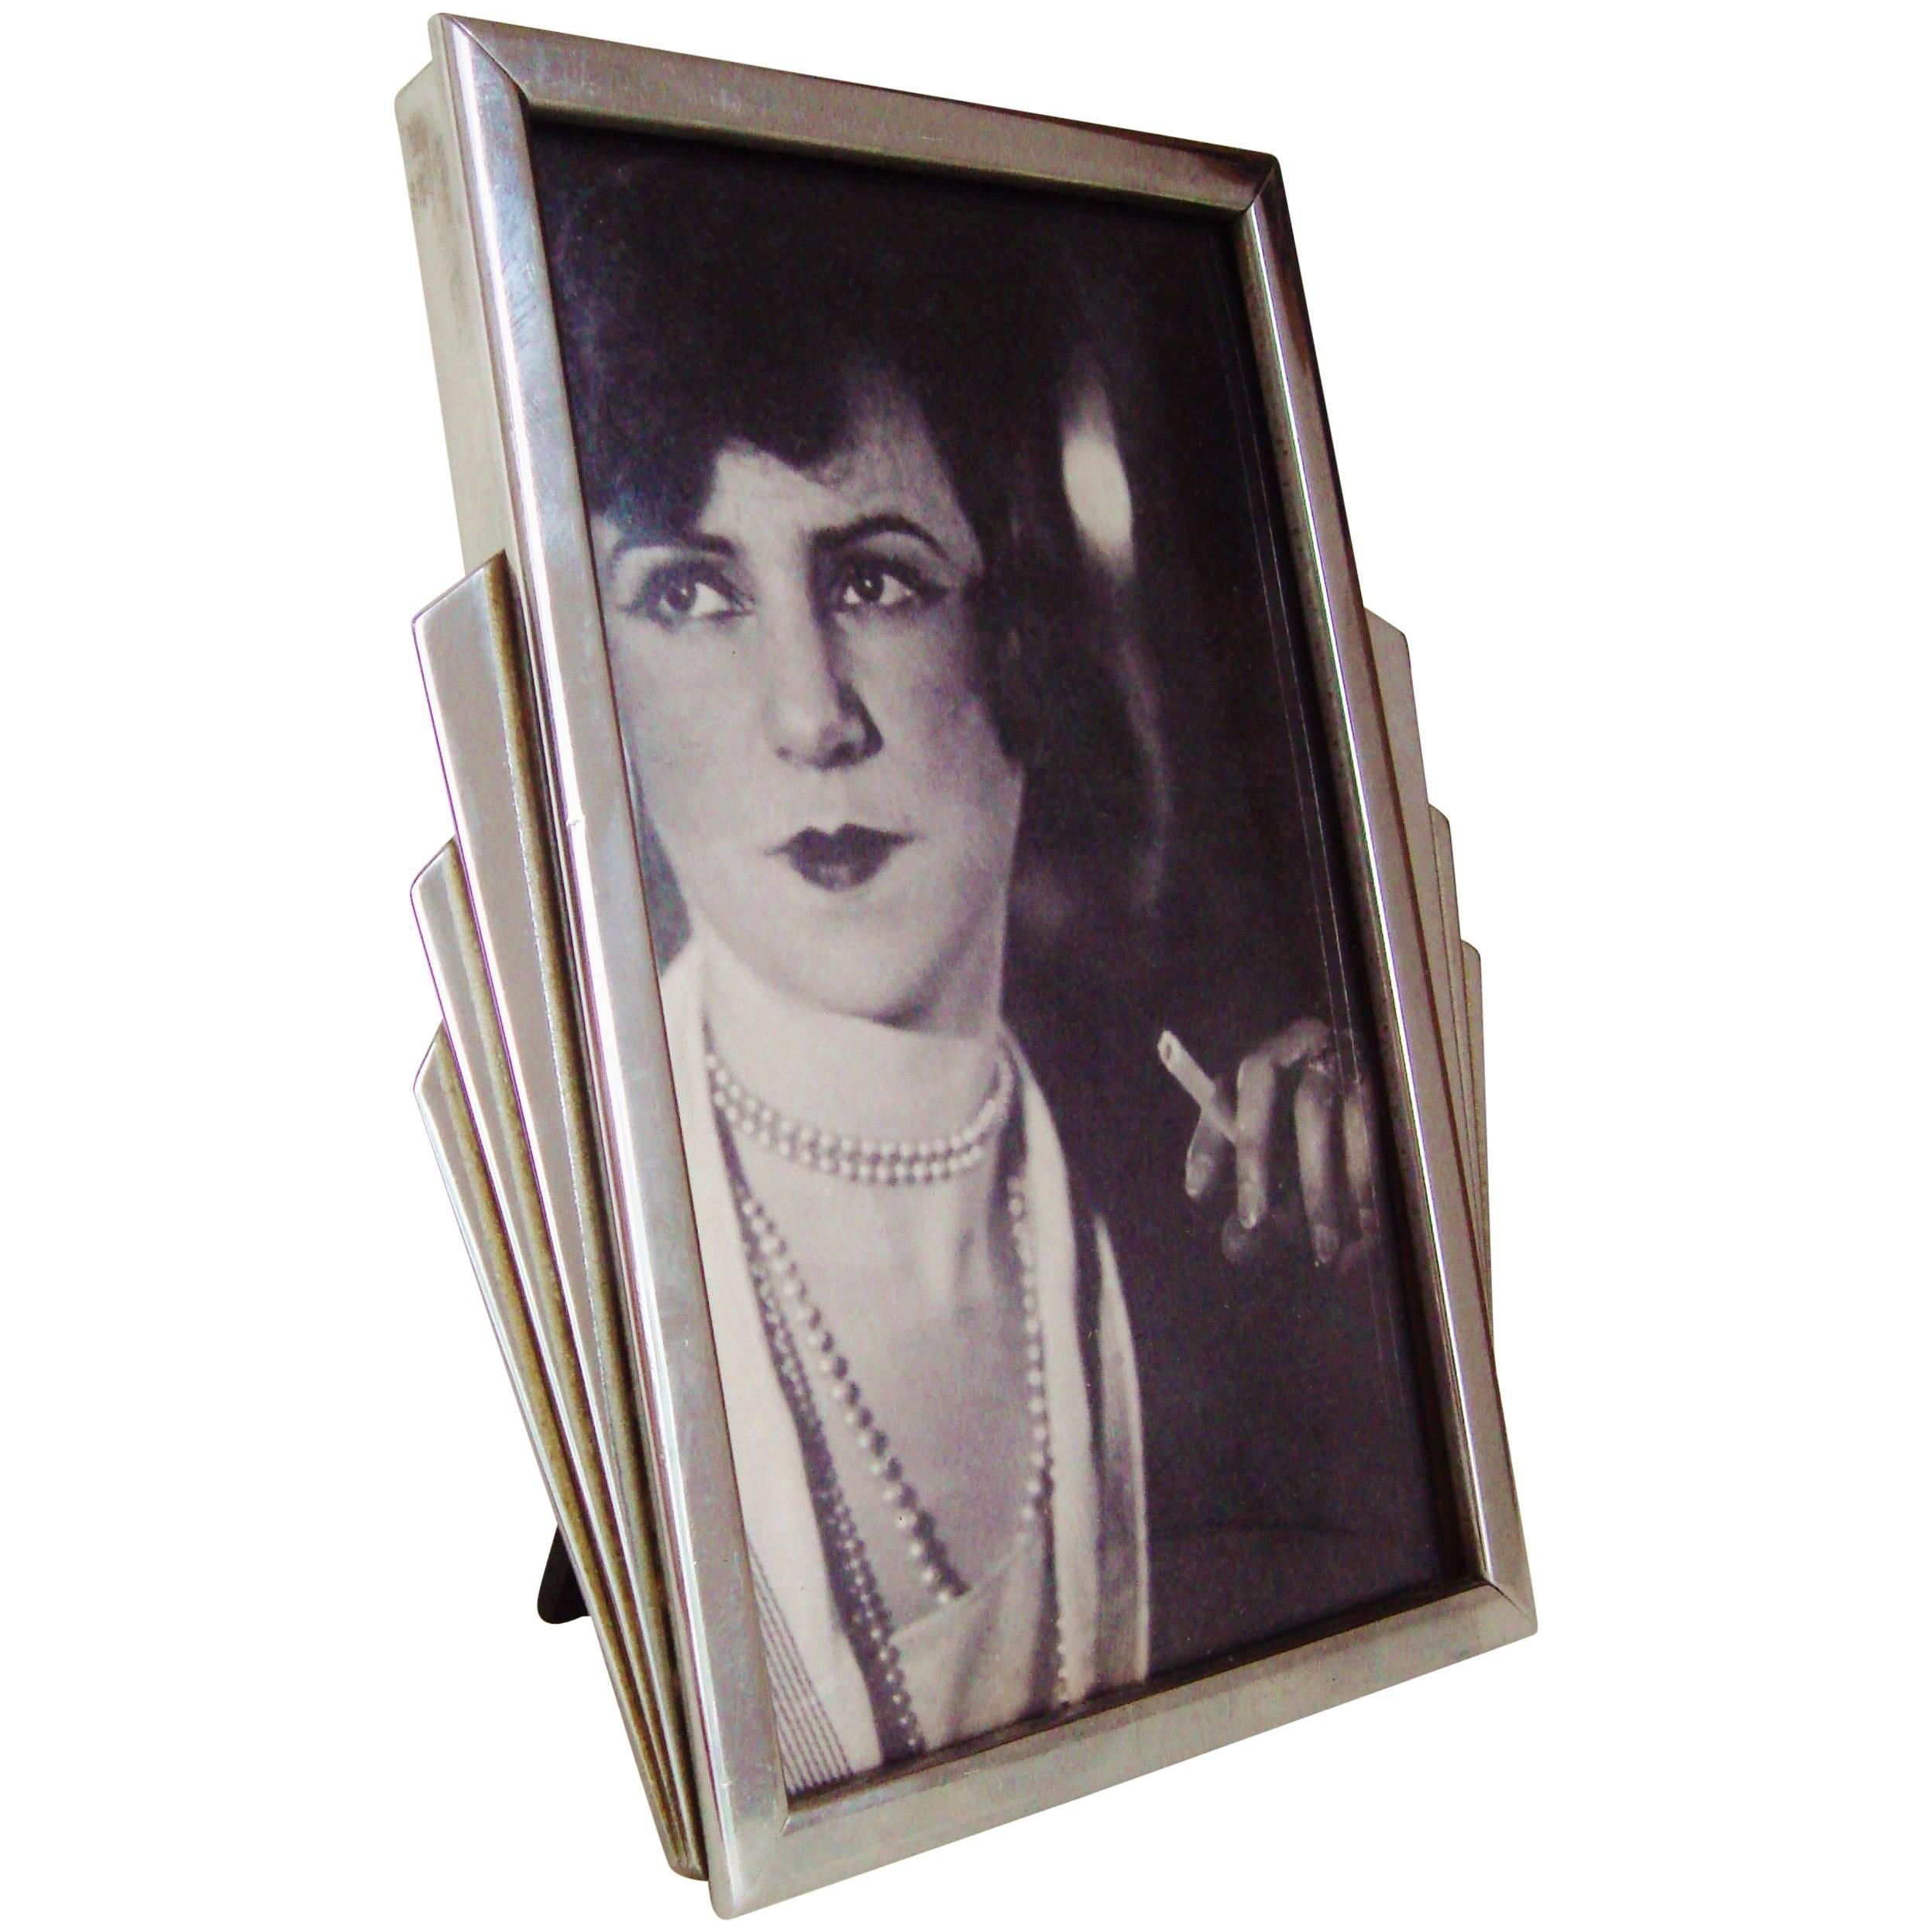 English Art Deco Wooden Backed Chrome Surround Photo Frame with Triple Sunrays